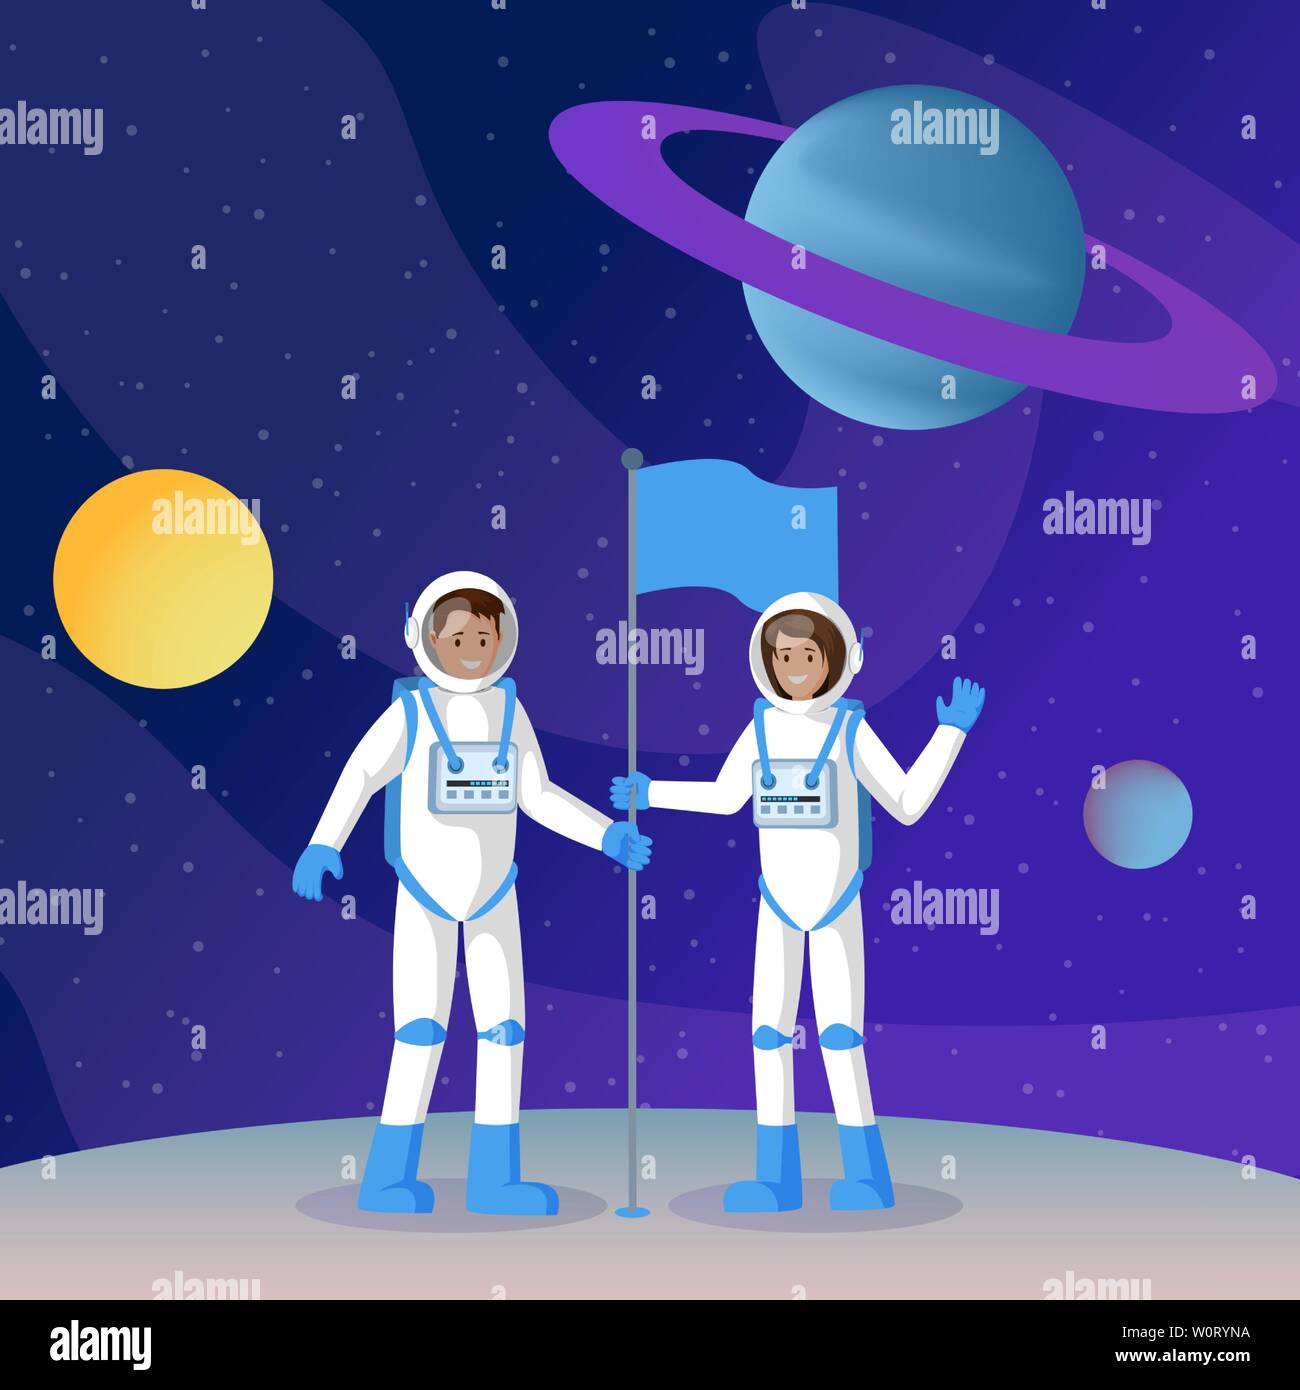 Two cosmonauts placing flag flat illustration. Male and female smiling astronauts in outer space waving hands cartoon characters. Another planet, moon landing, universe exploration drawing Stock Vector